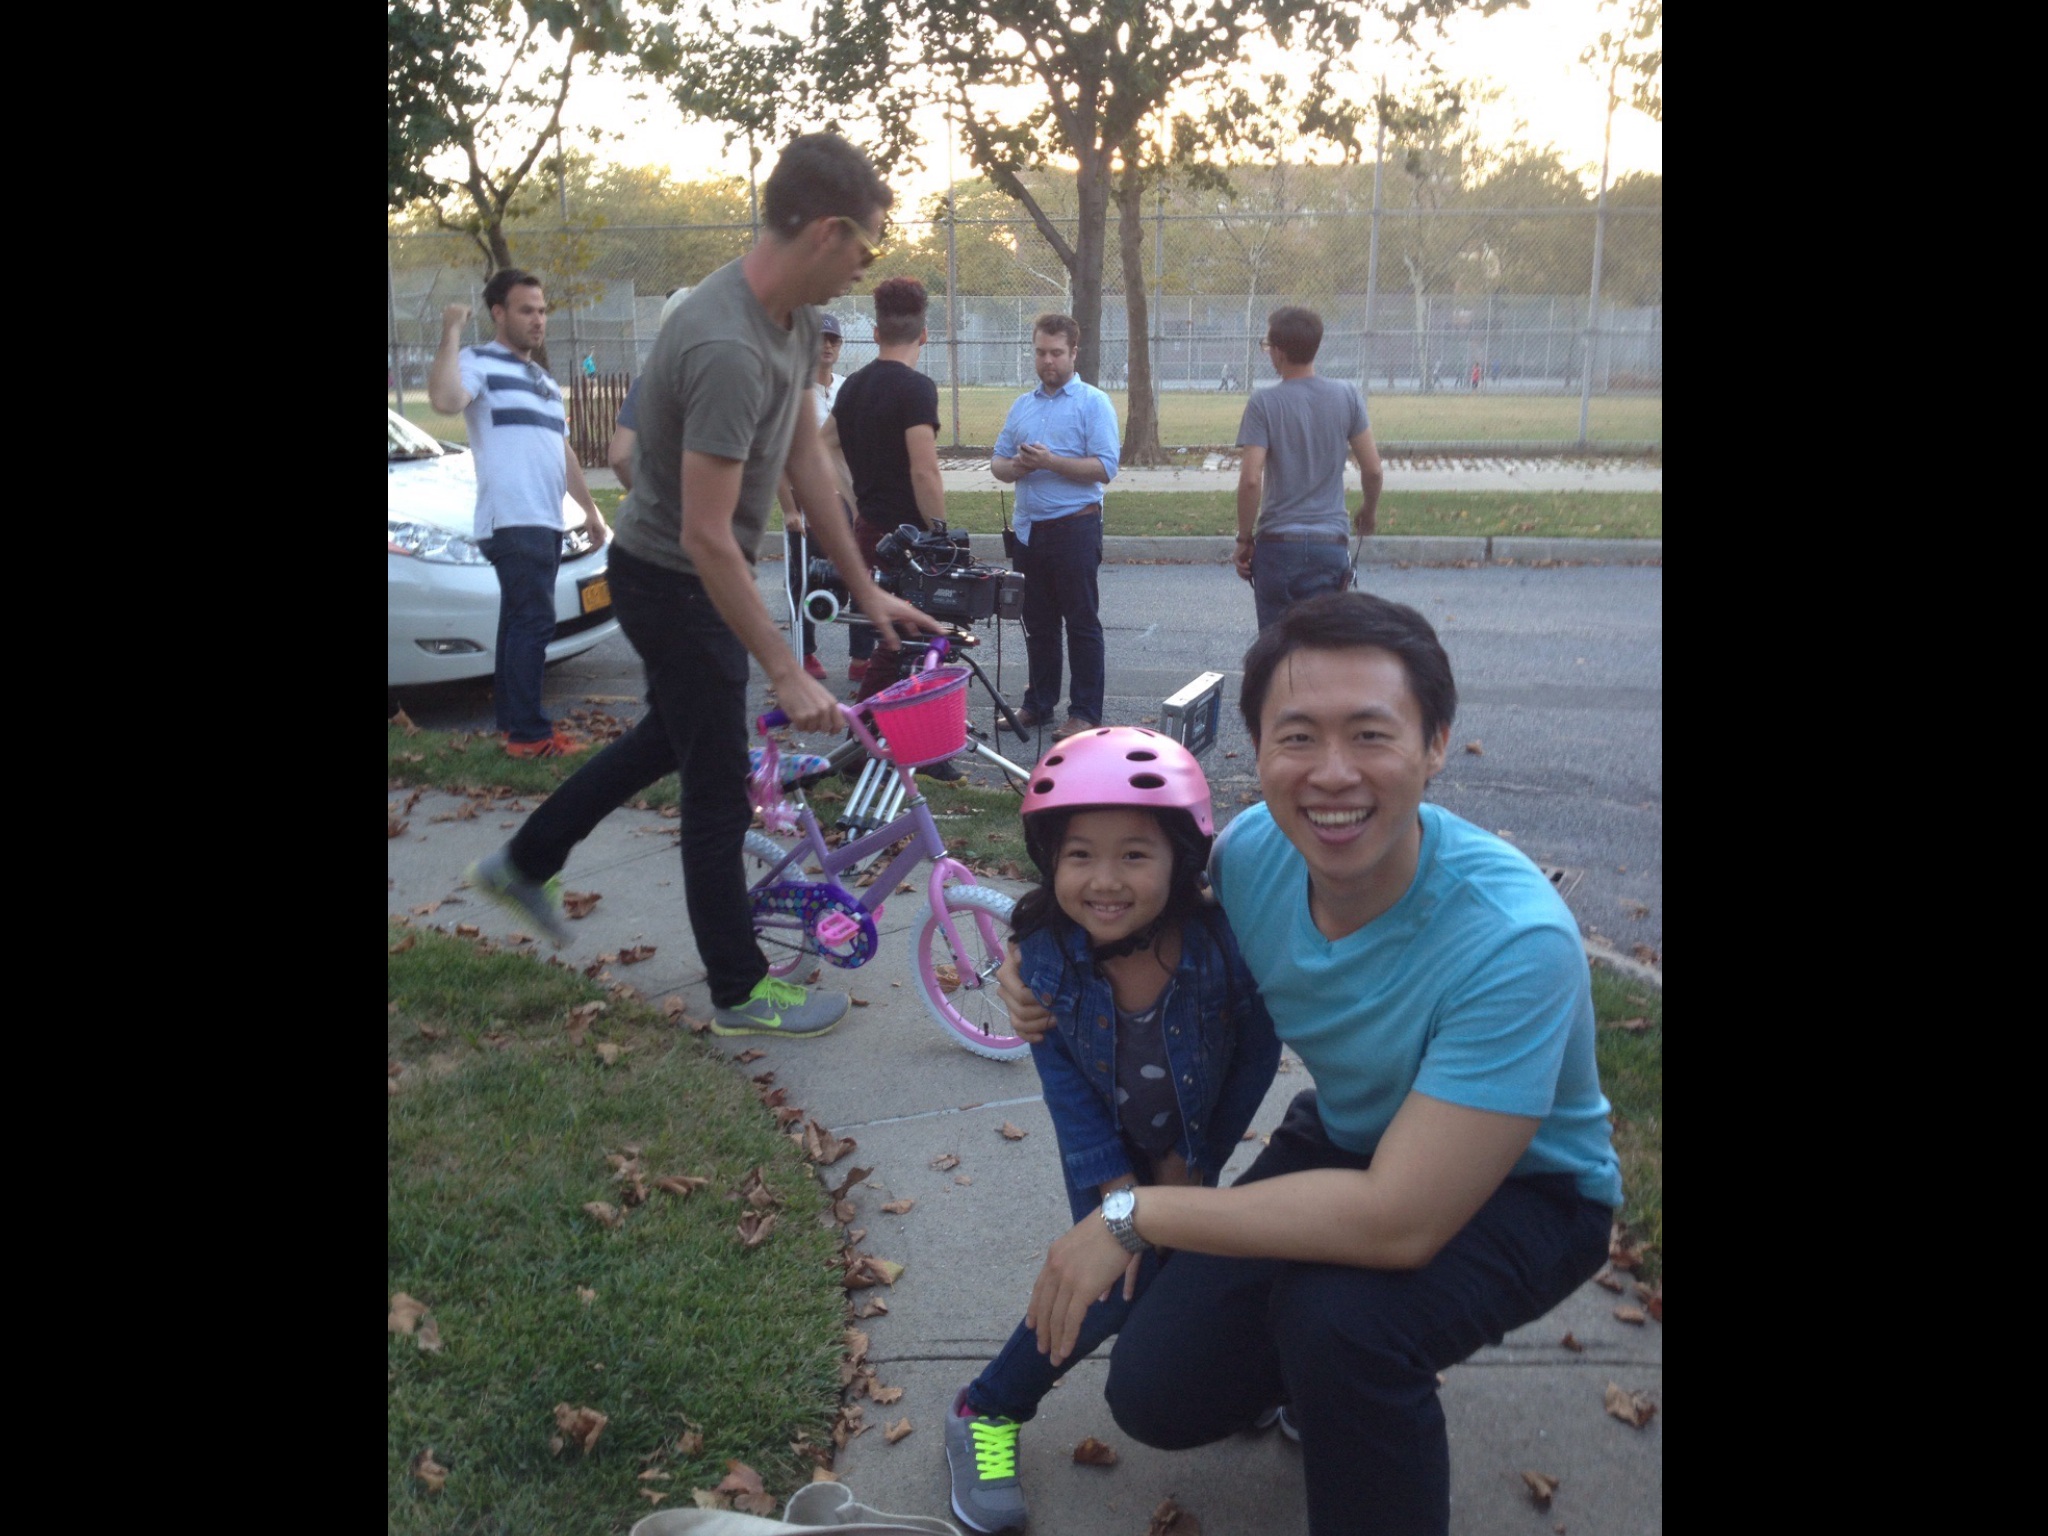 Raina Cheng at the DORA VALUES PROMO Shoot for the DORA THE EXPLORER TV Animated Series with Stephen Lin who played her dad helping her ride her bike. 2013